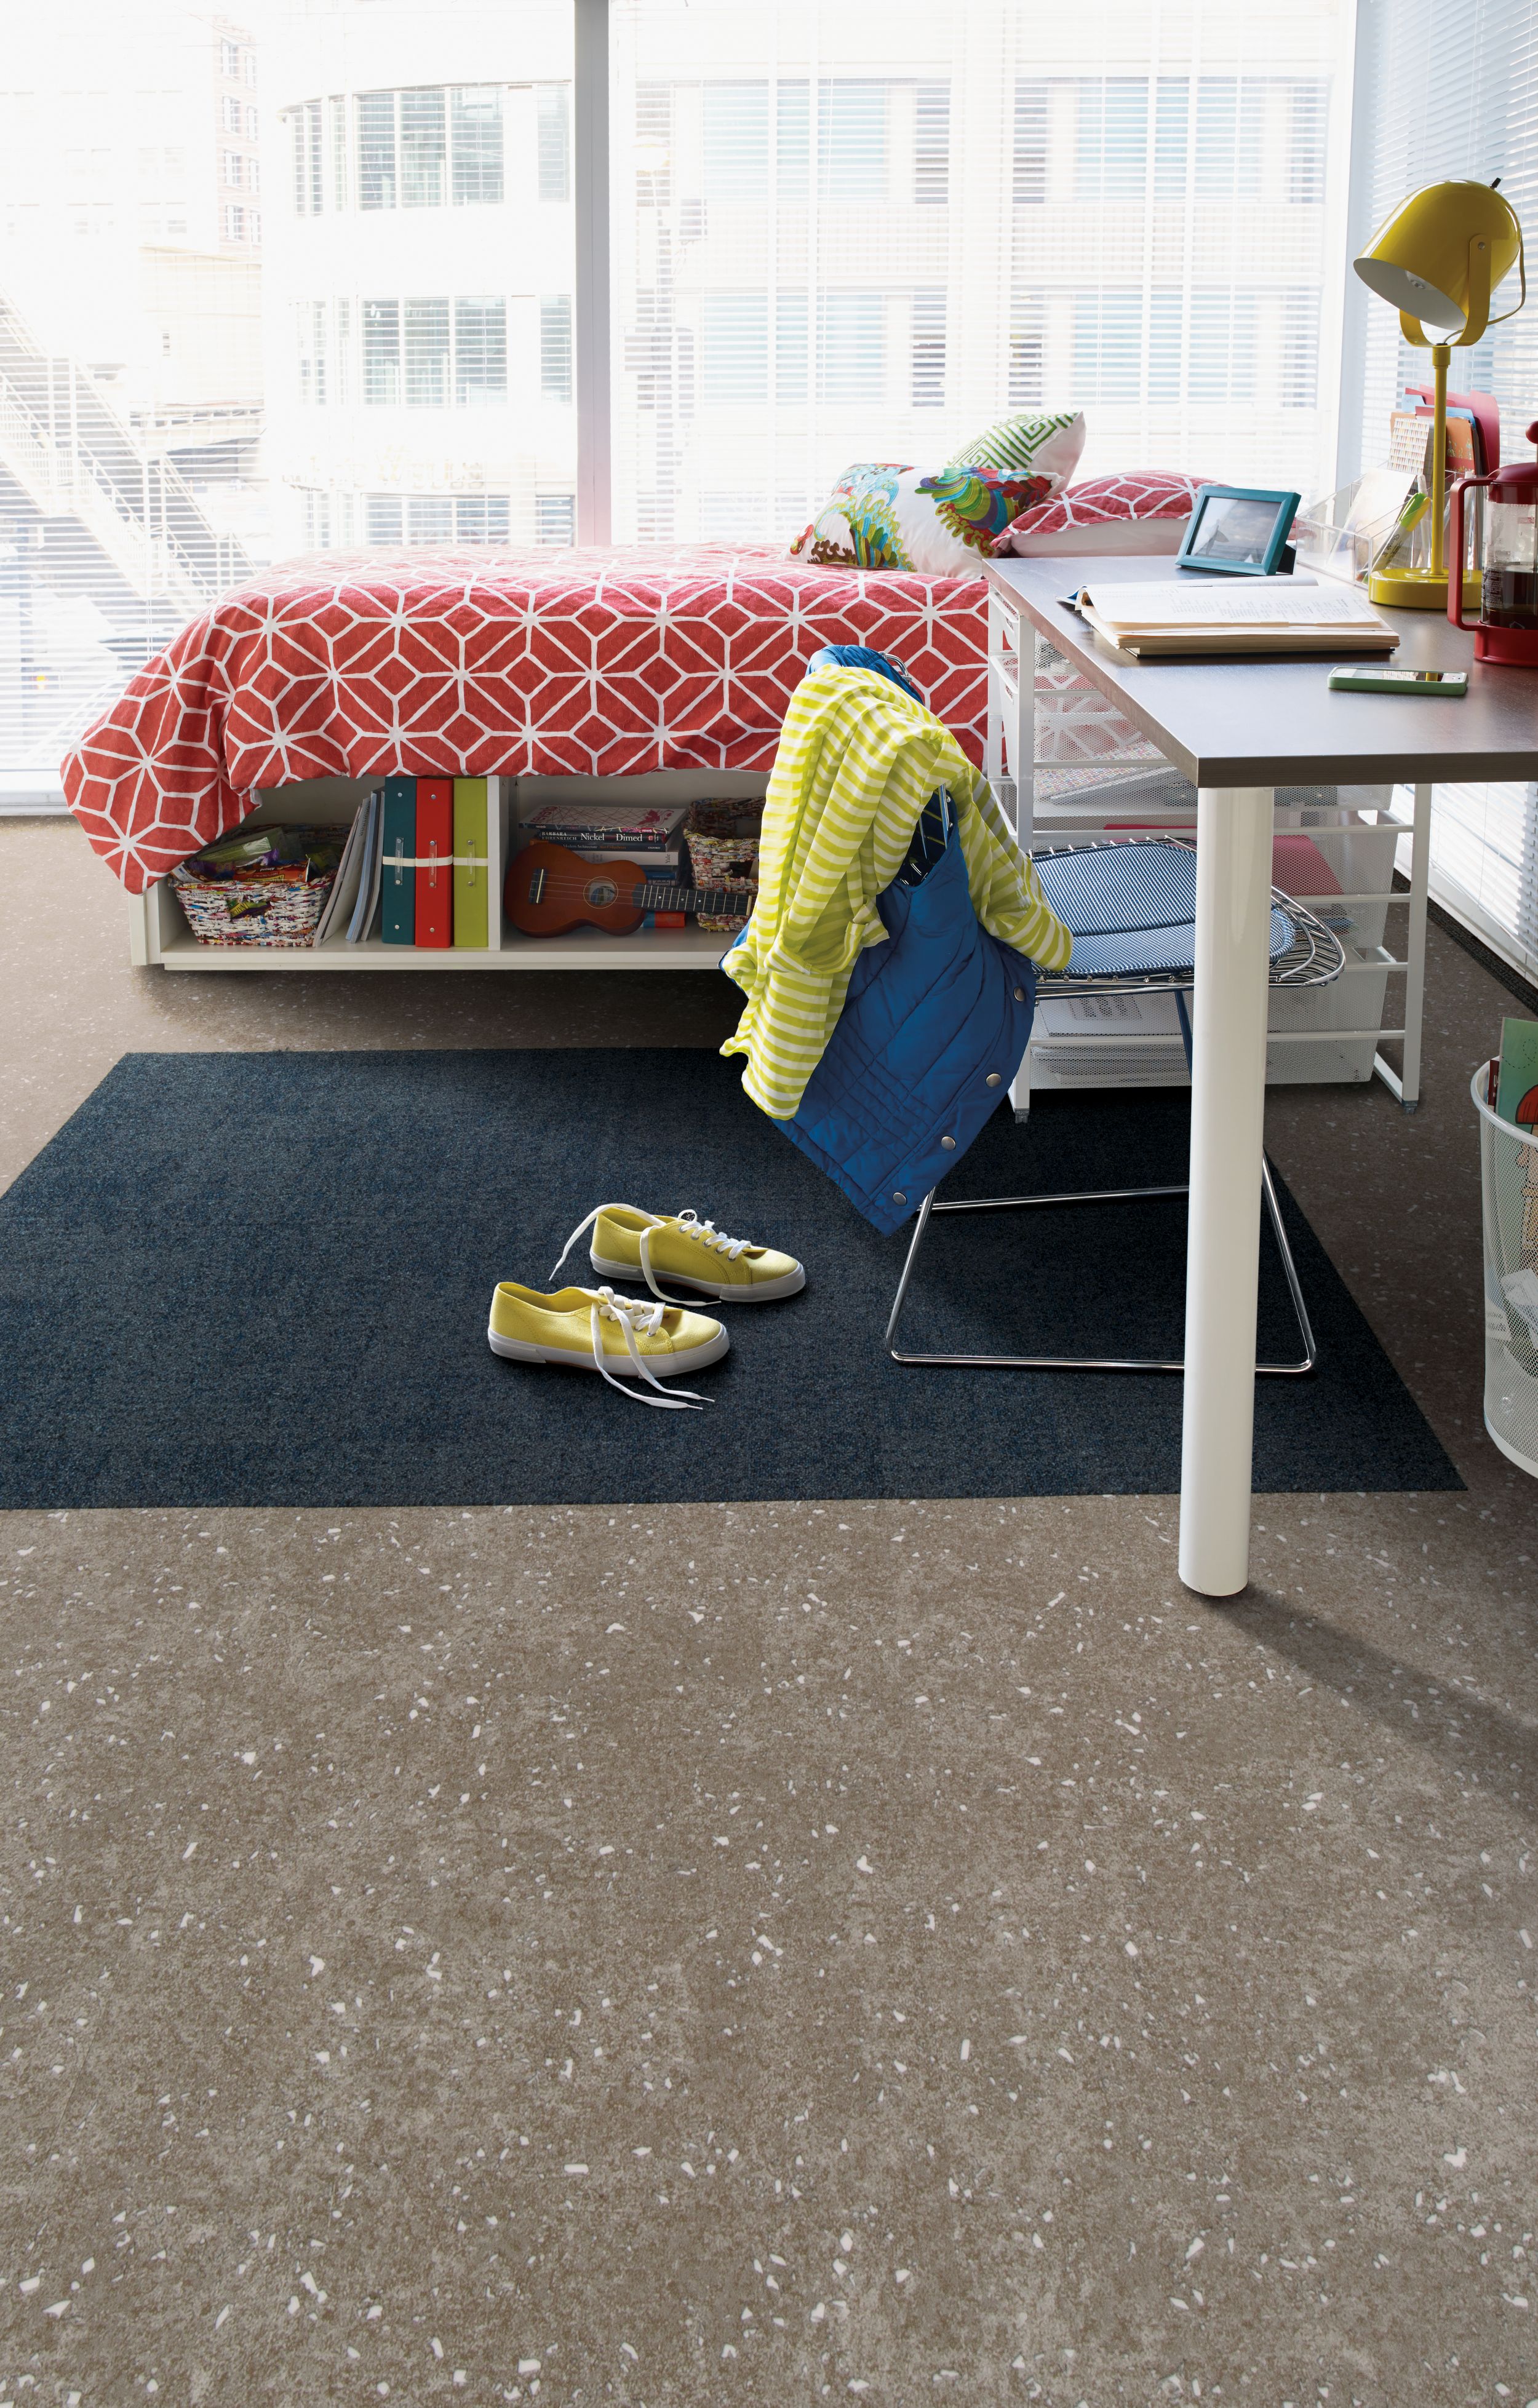 image Interface Step in Time carpet tile and Walk the Aisle LVT in a dorm room numéro 13